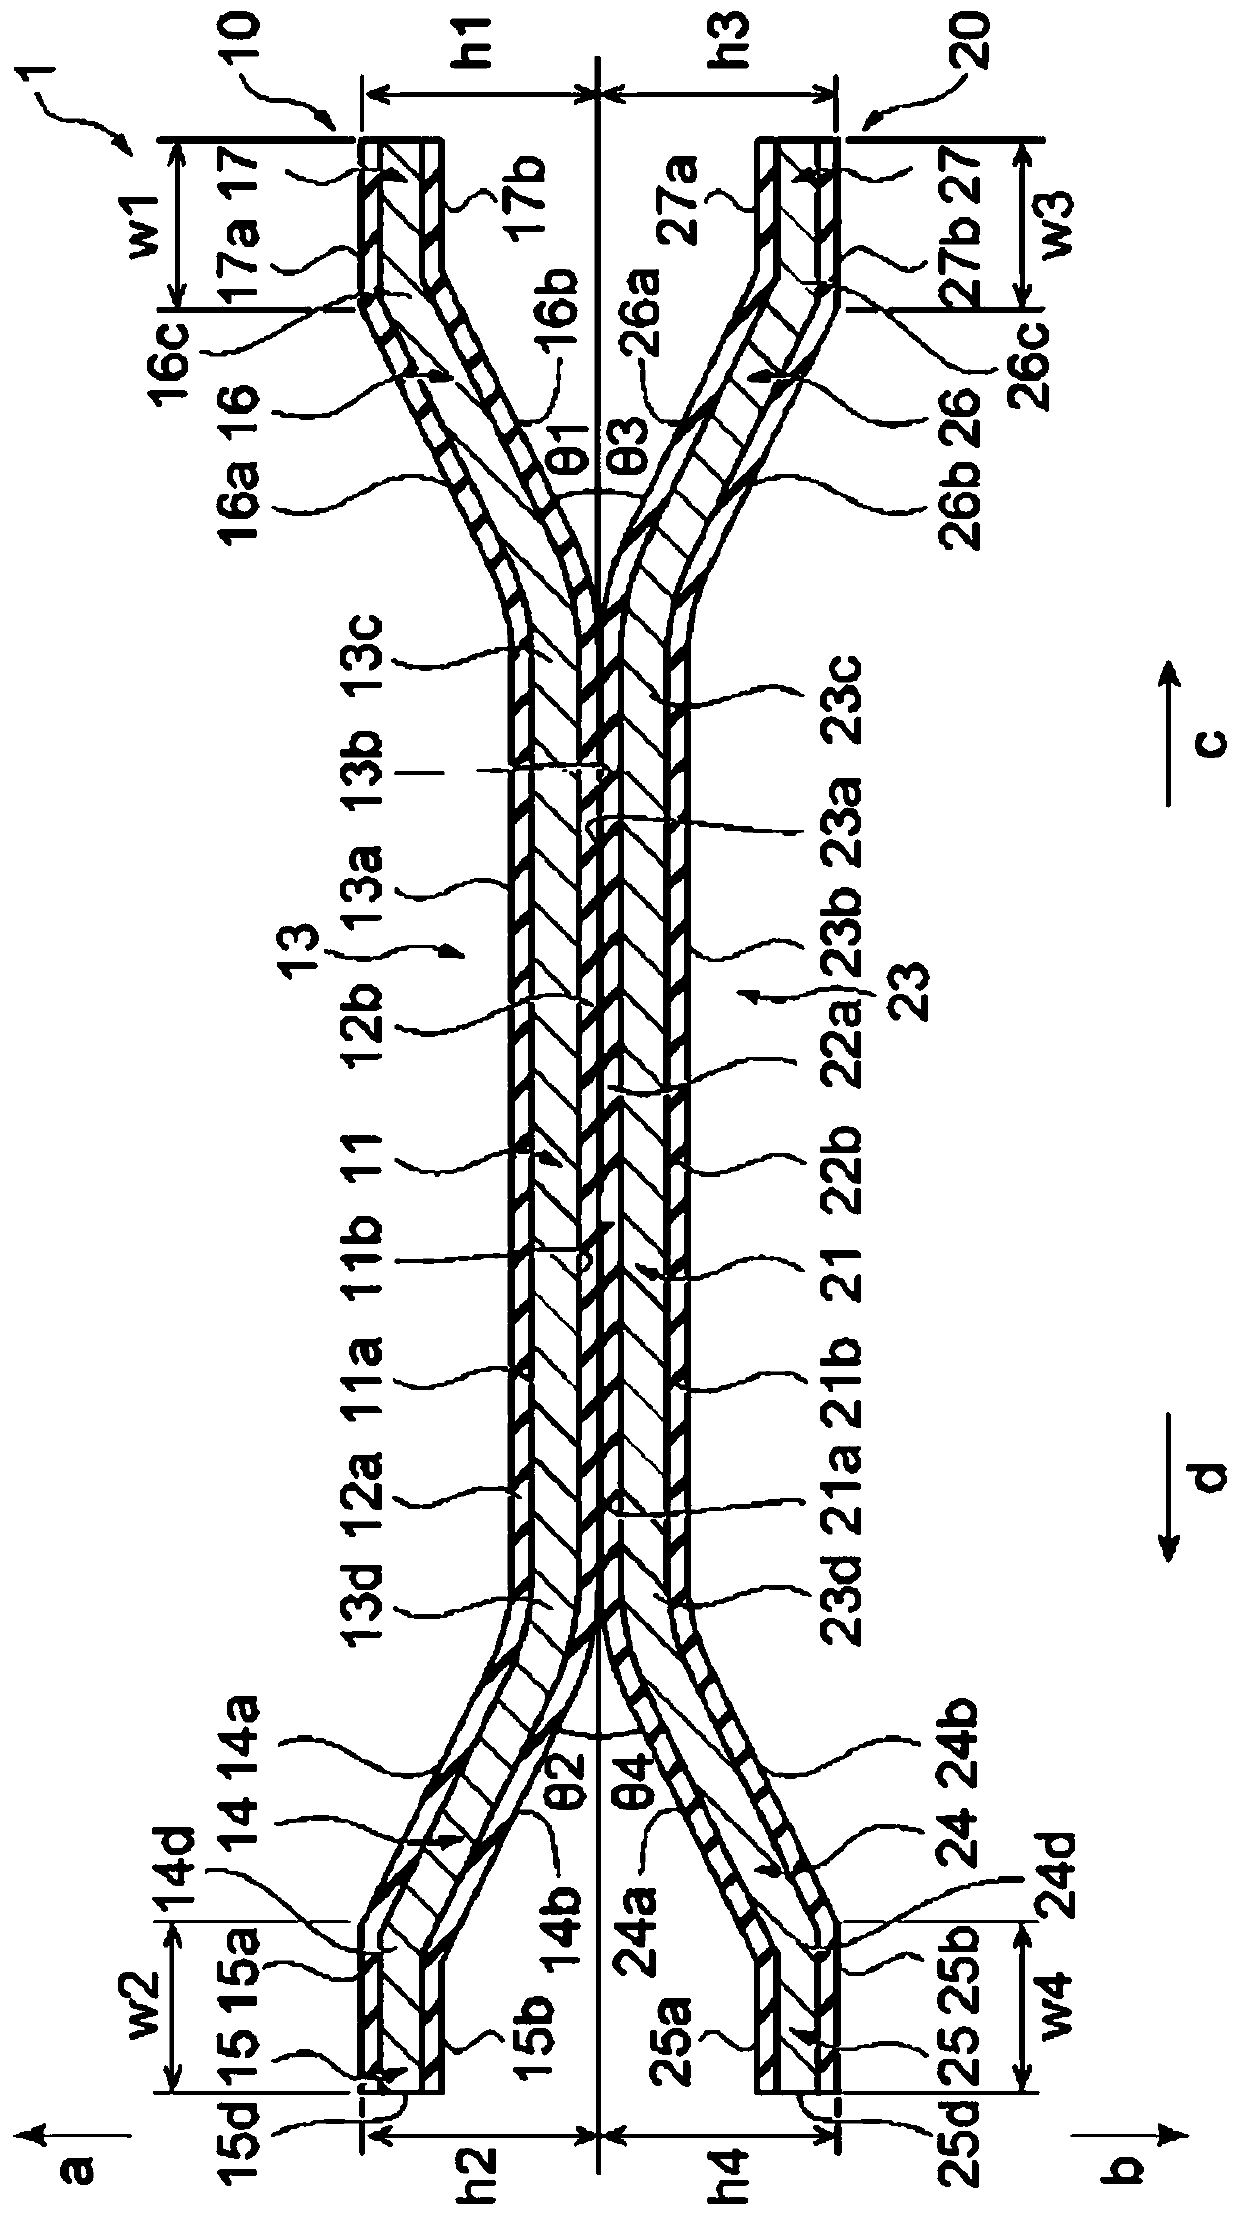 Gasket and sealing structure